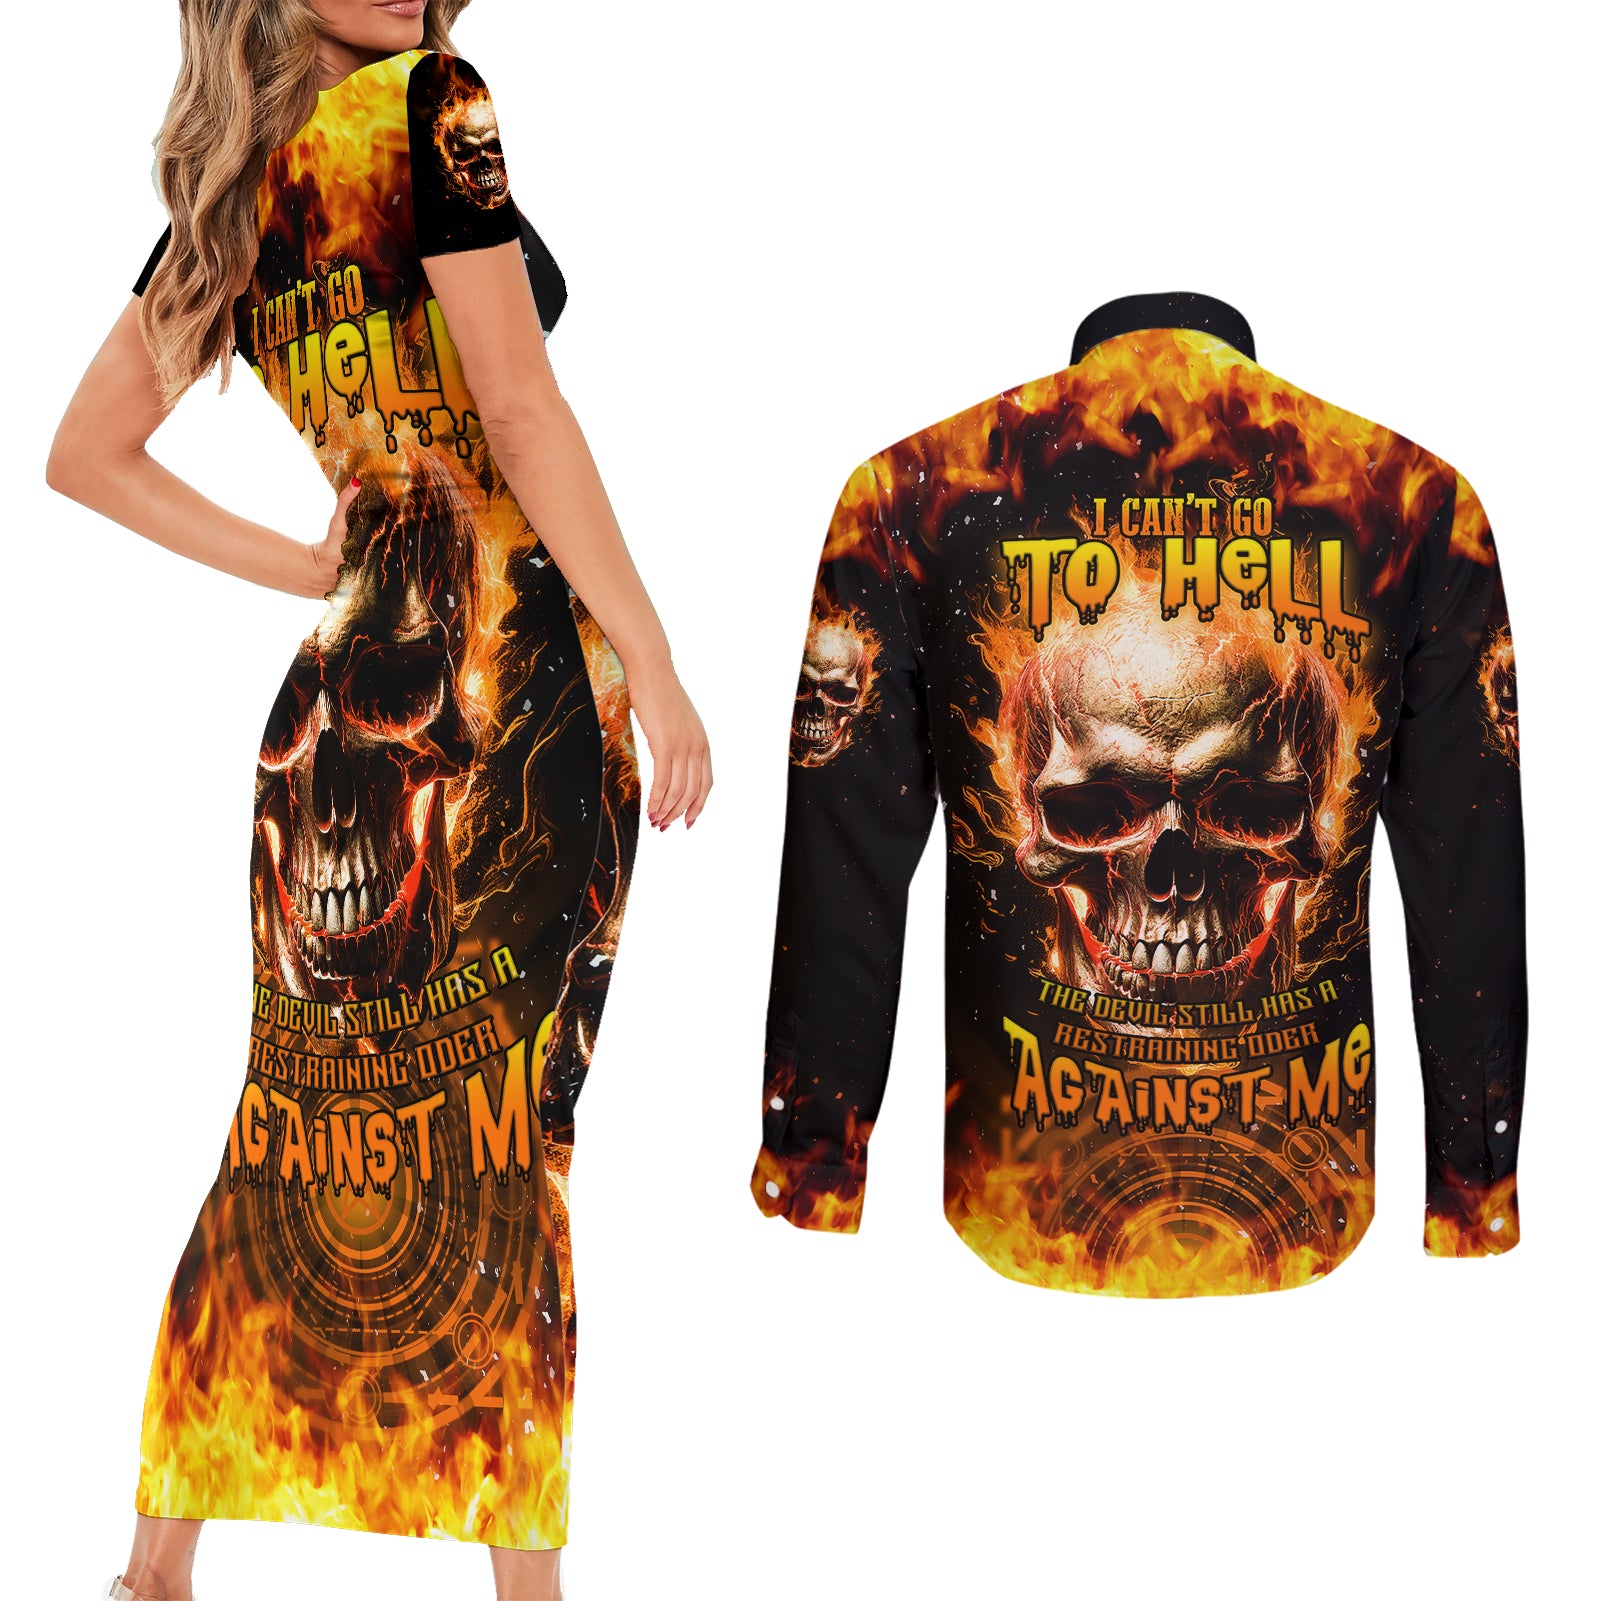 magic-fire-skull-couples-matching-short-sleeve-bodycon-dress-and-long-sleeve-button-shirts-i-cant-go-to-hell-the-devil-still-has-a-rest-training-oder-against-me